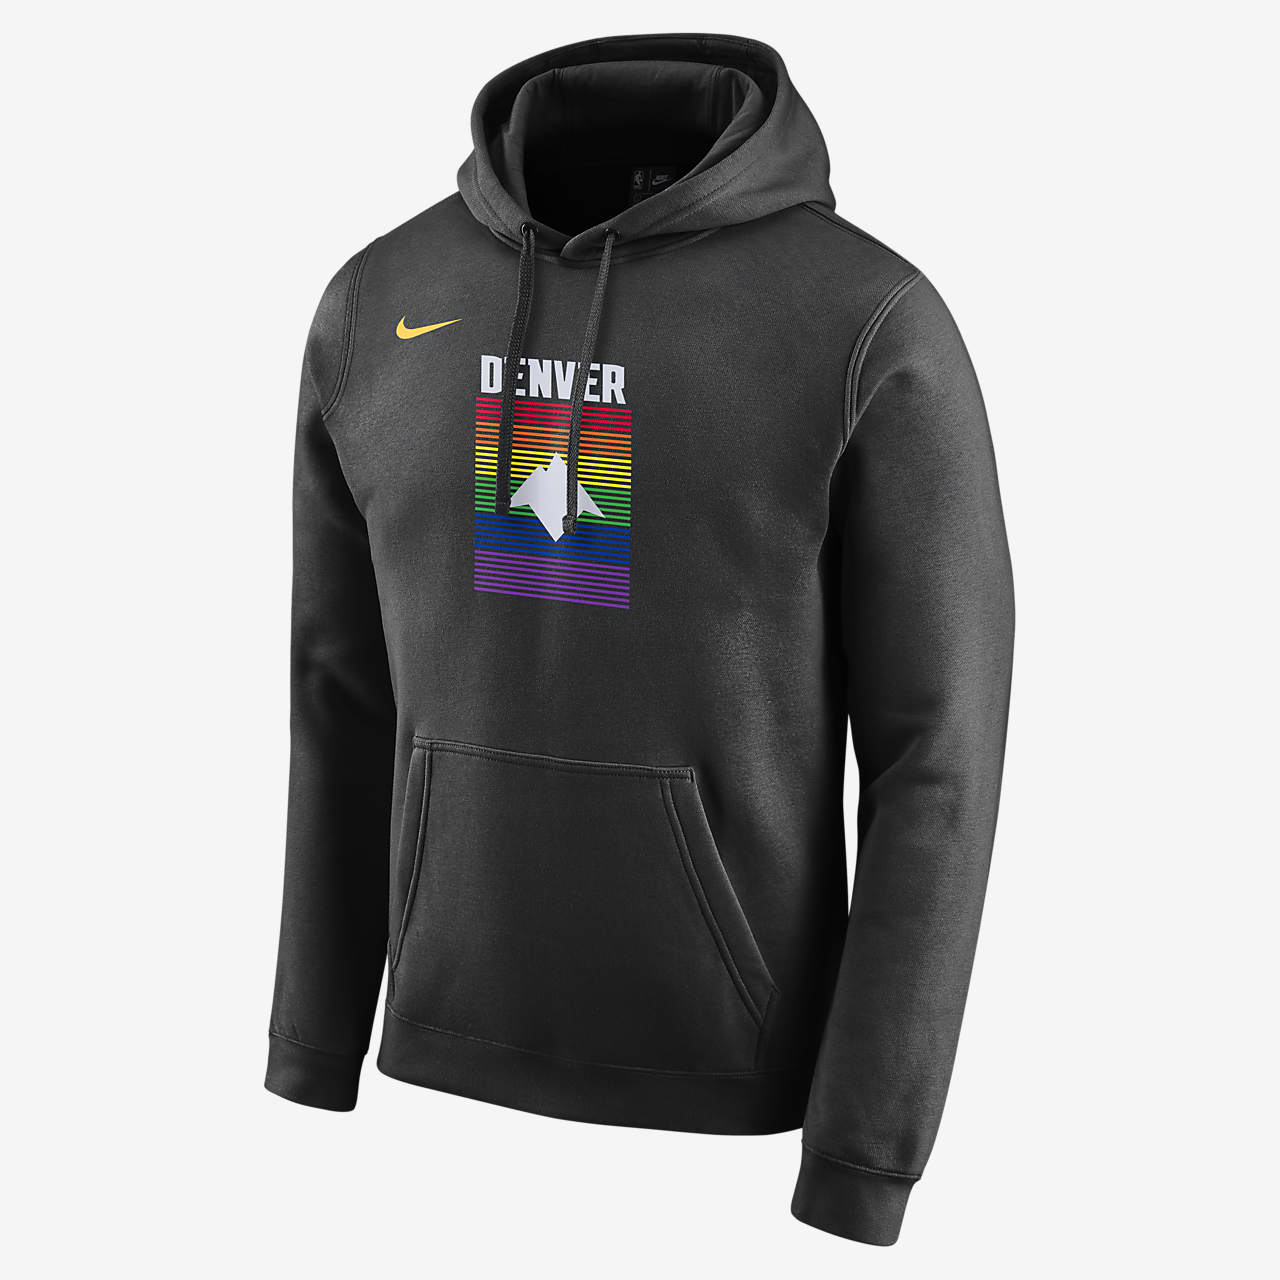 nuggets city edition hoodie